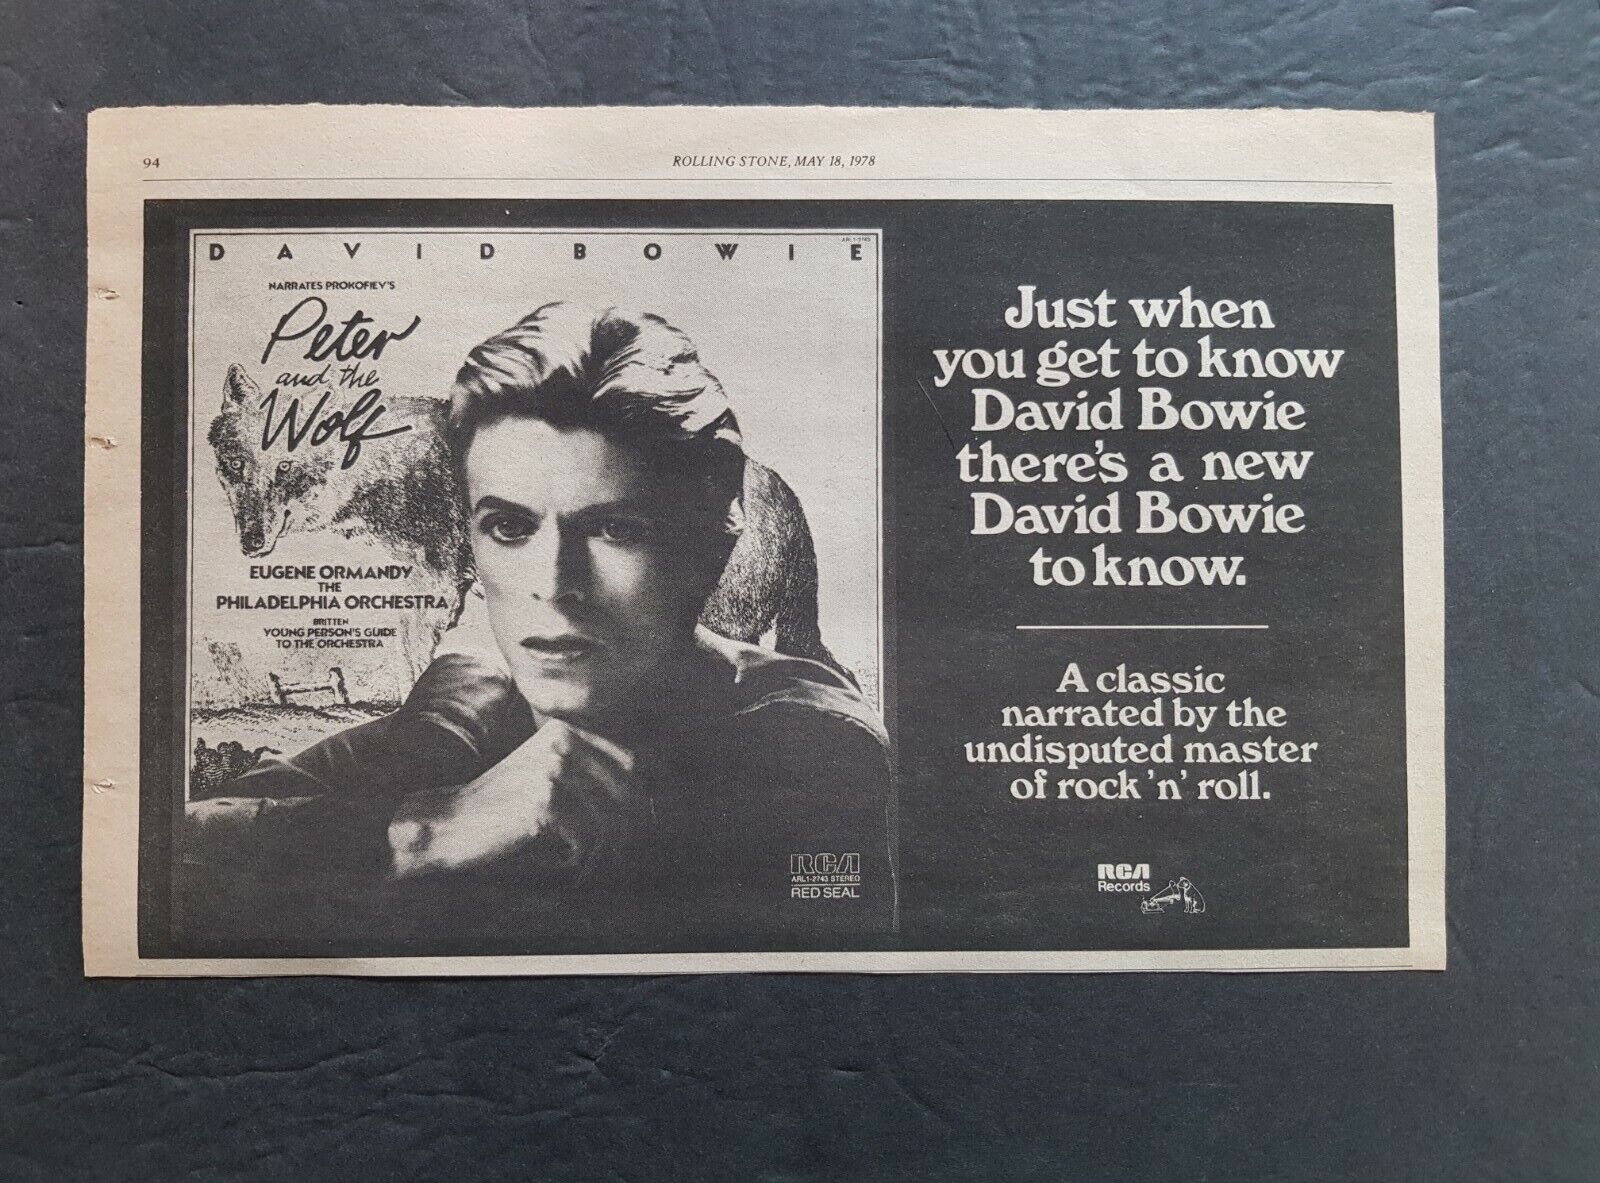 Peter And The Wolf Narrated By David Bowie Promo Print Ad Vintage 1978